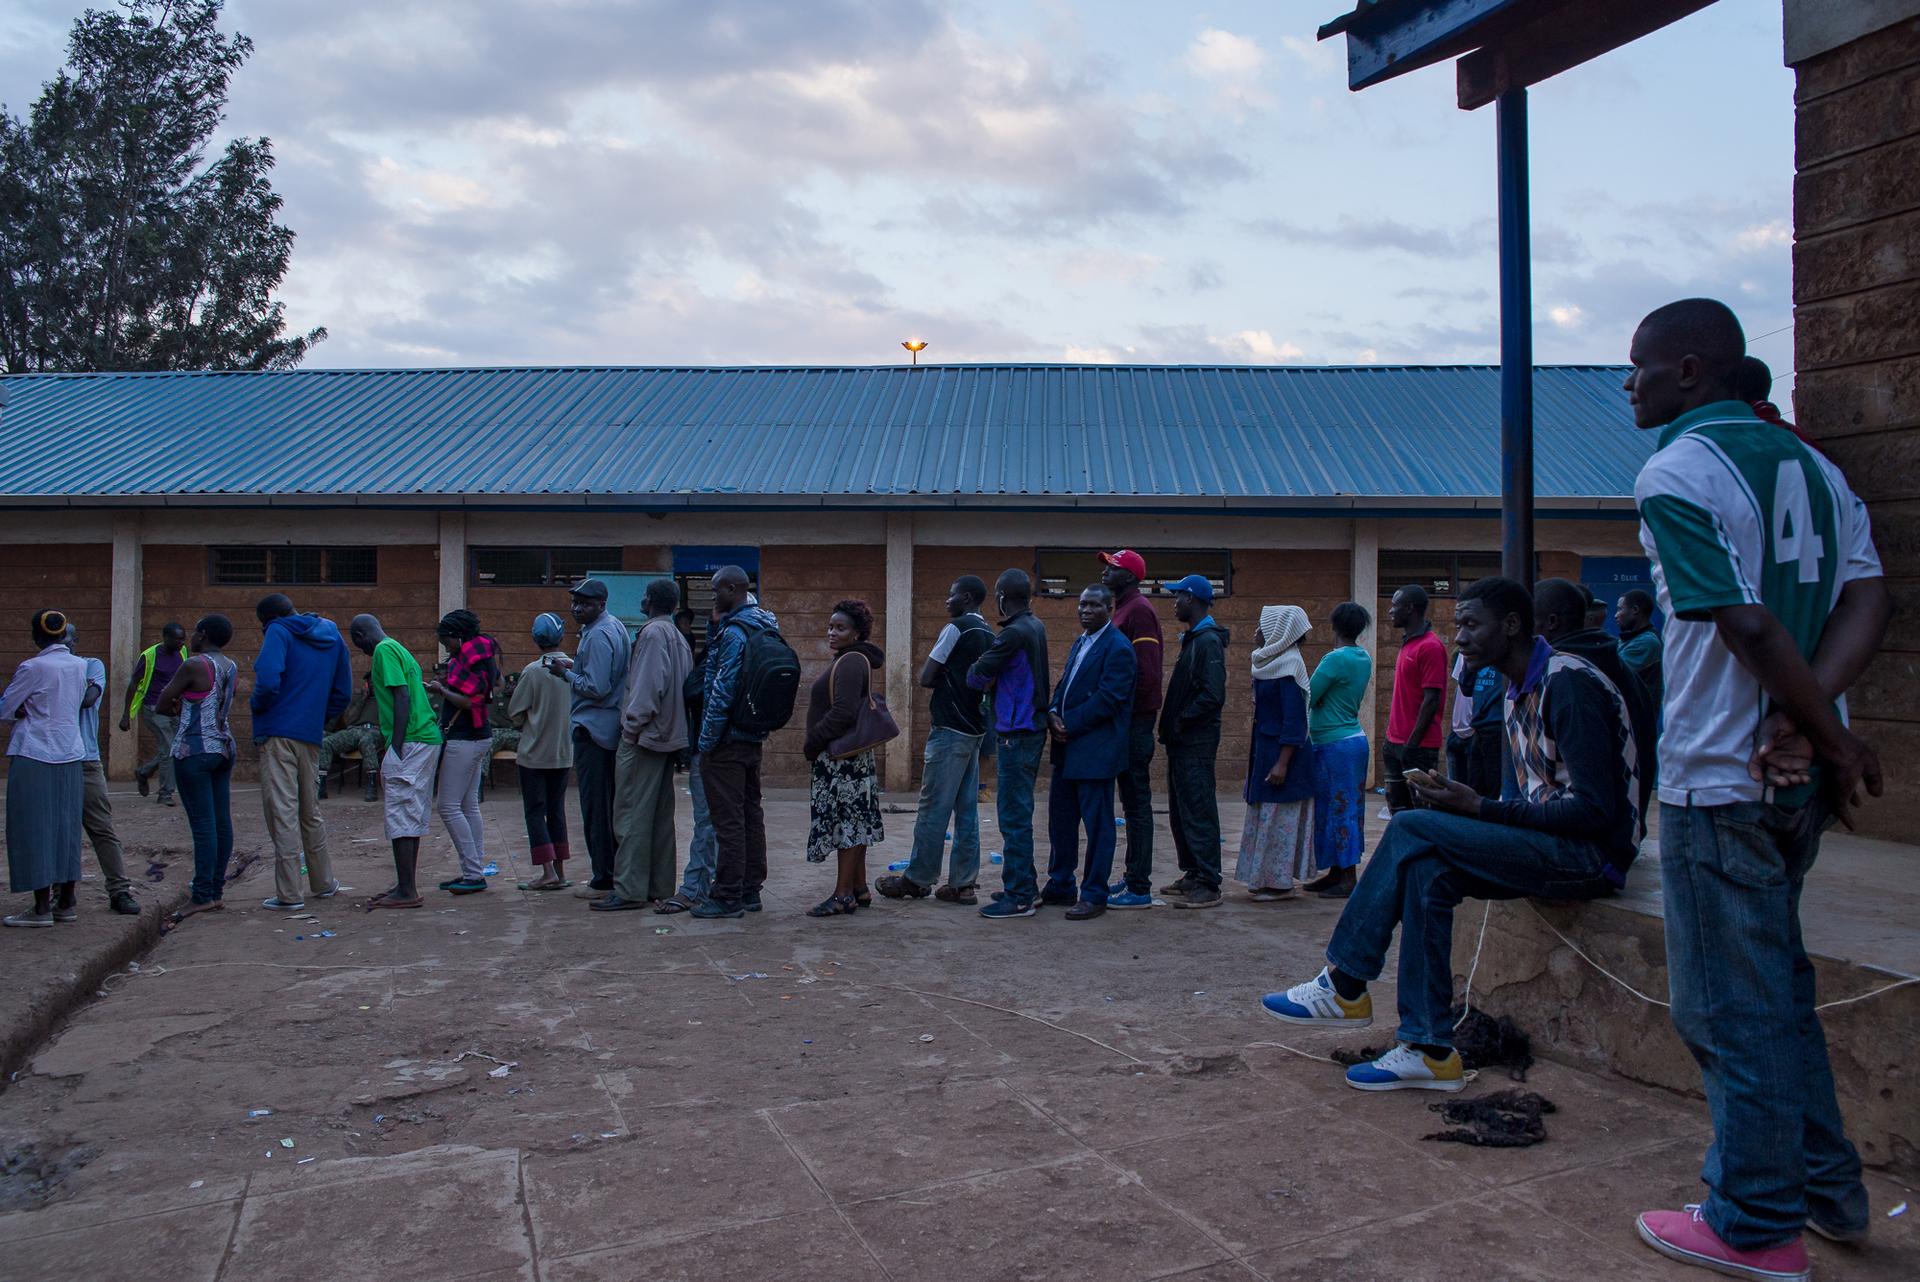 Kenyans stood in lines late into Tuesday night in order to cast their vote for their next president. Technical hangups, mis-delivered ballots and weather delays mean voters several counties will continue submitting ballots late into the night.